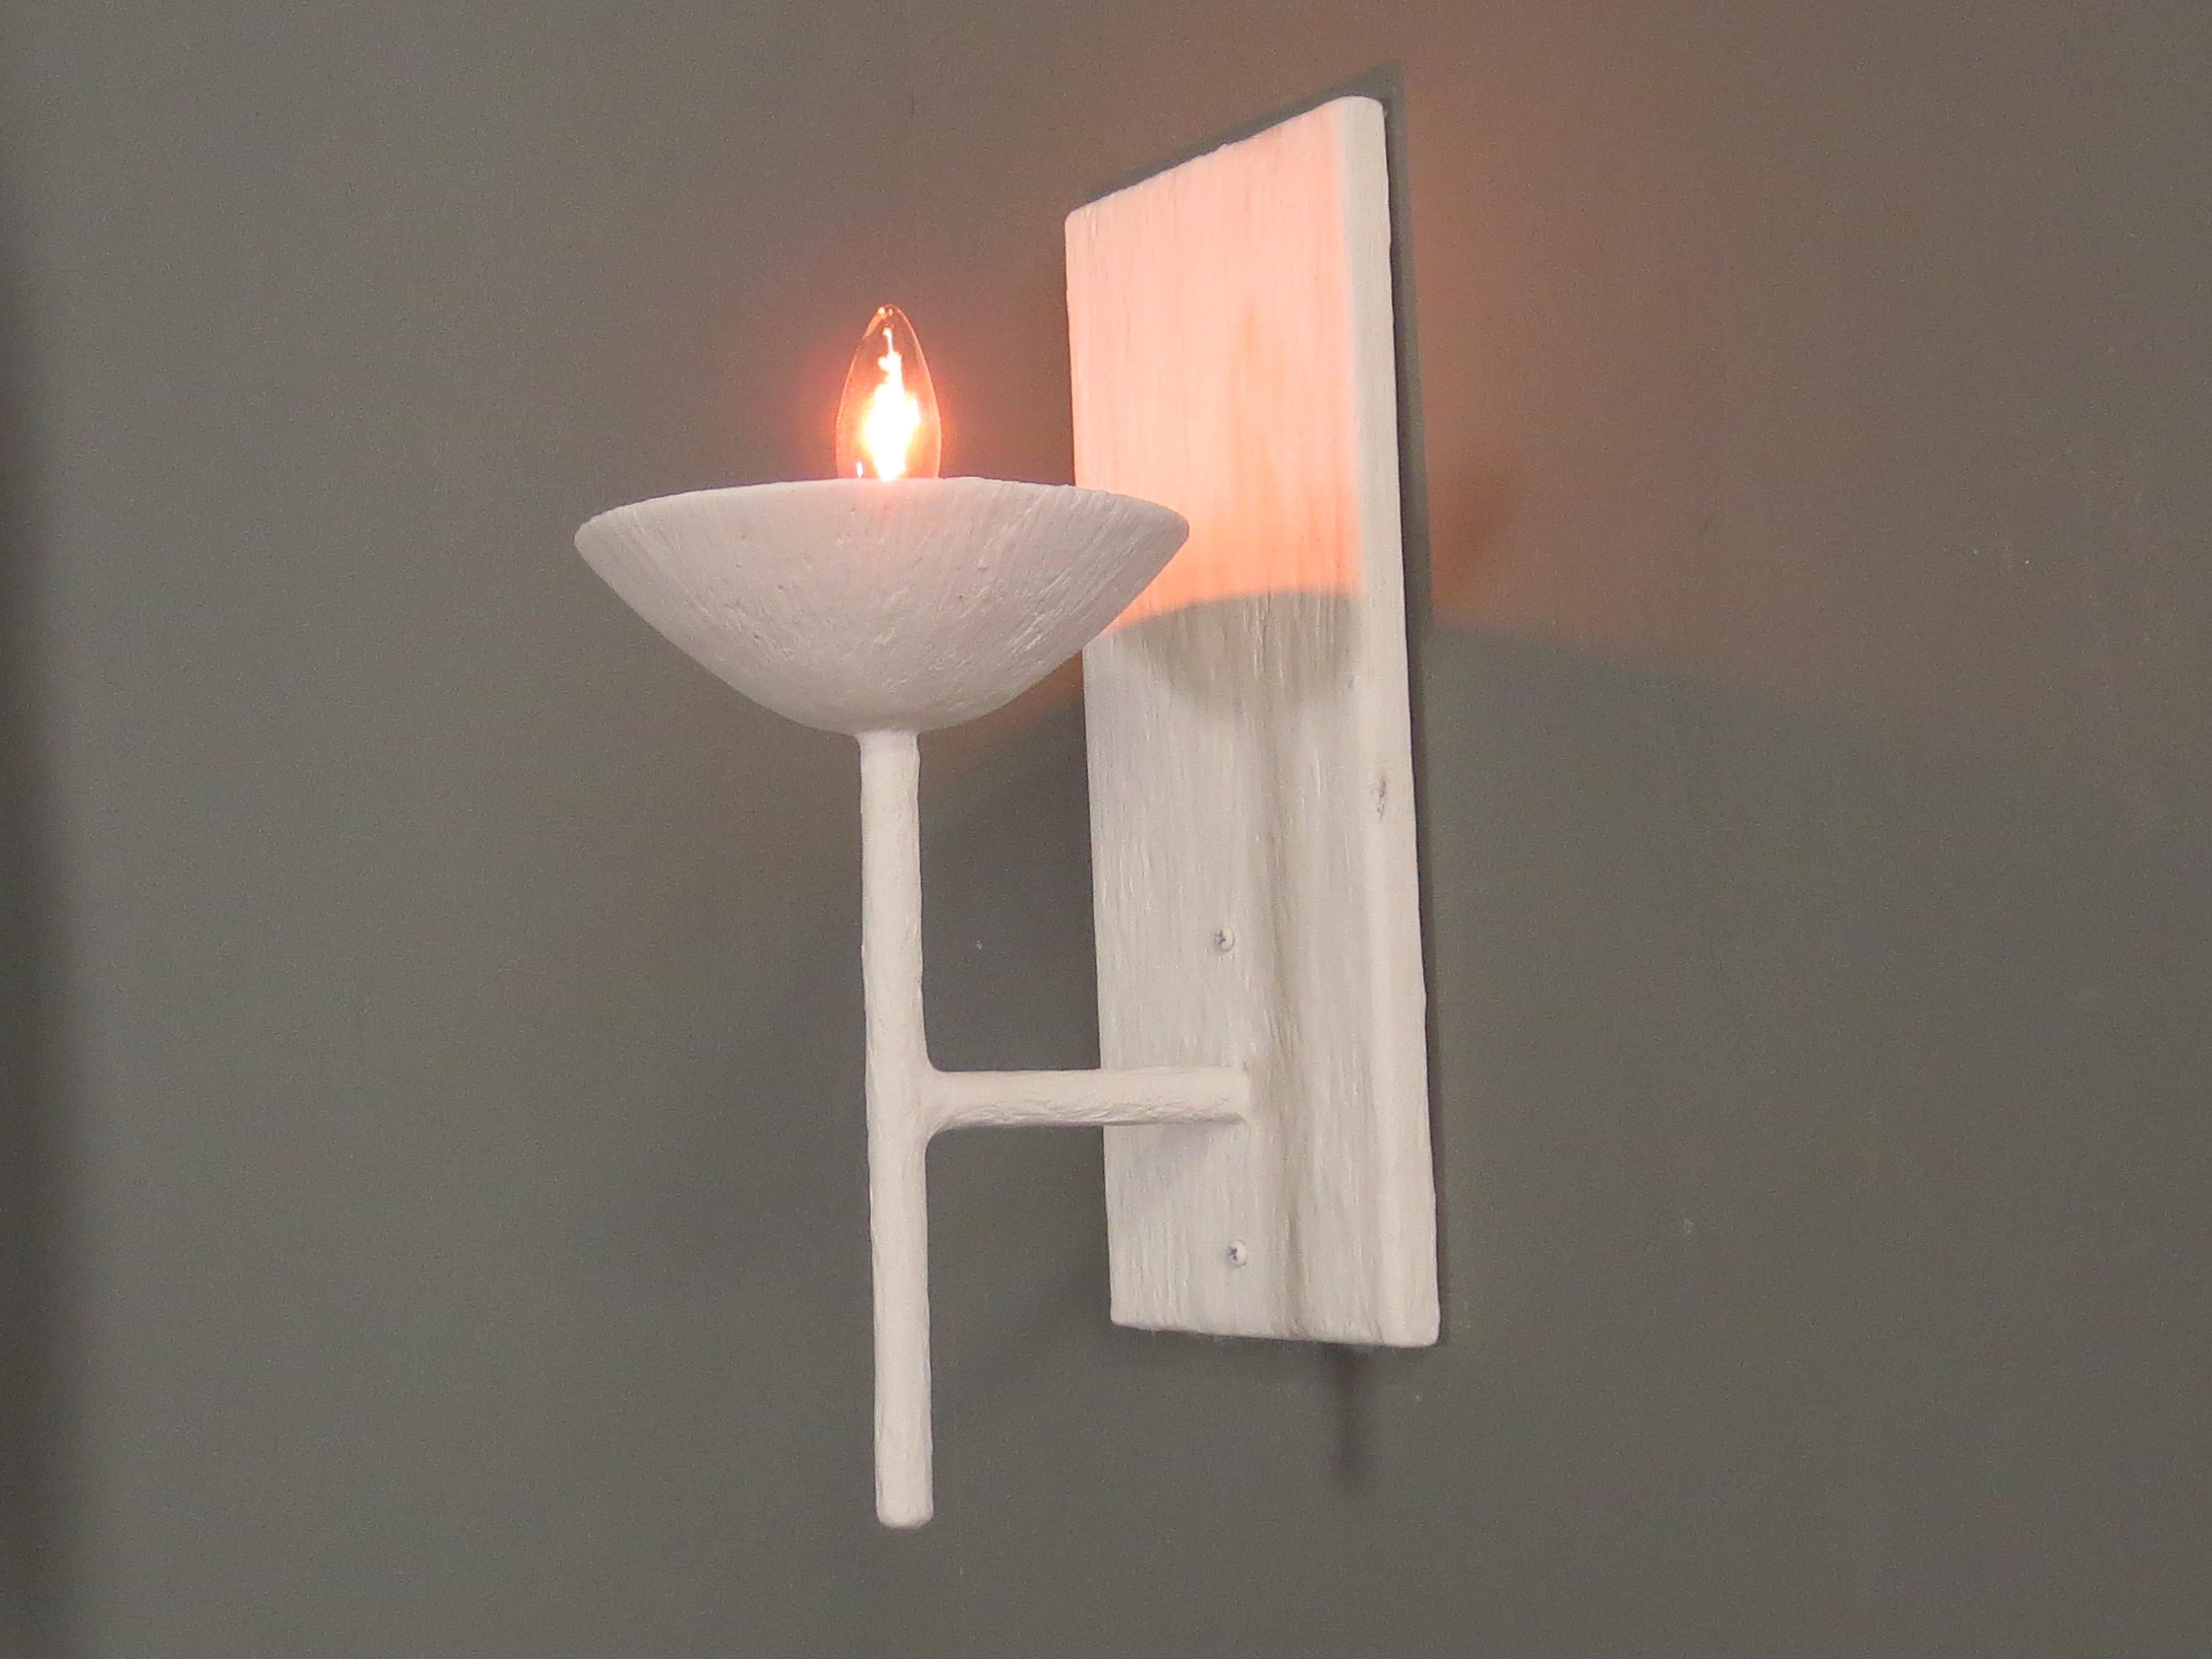 Single arm plaster sconce by Tracey Garet of Apsara Interior Design. The Sconce has a single 6